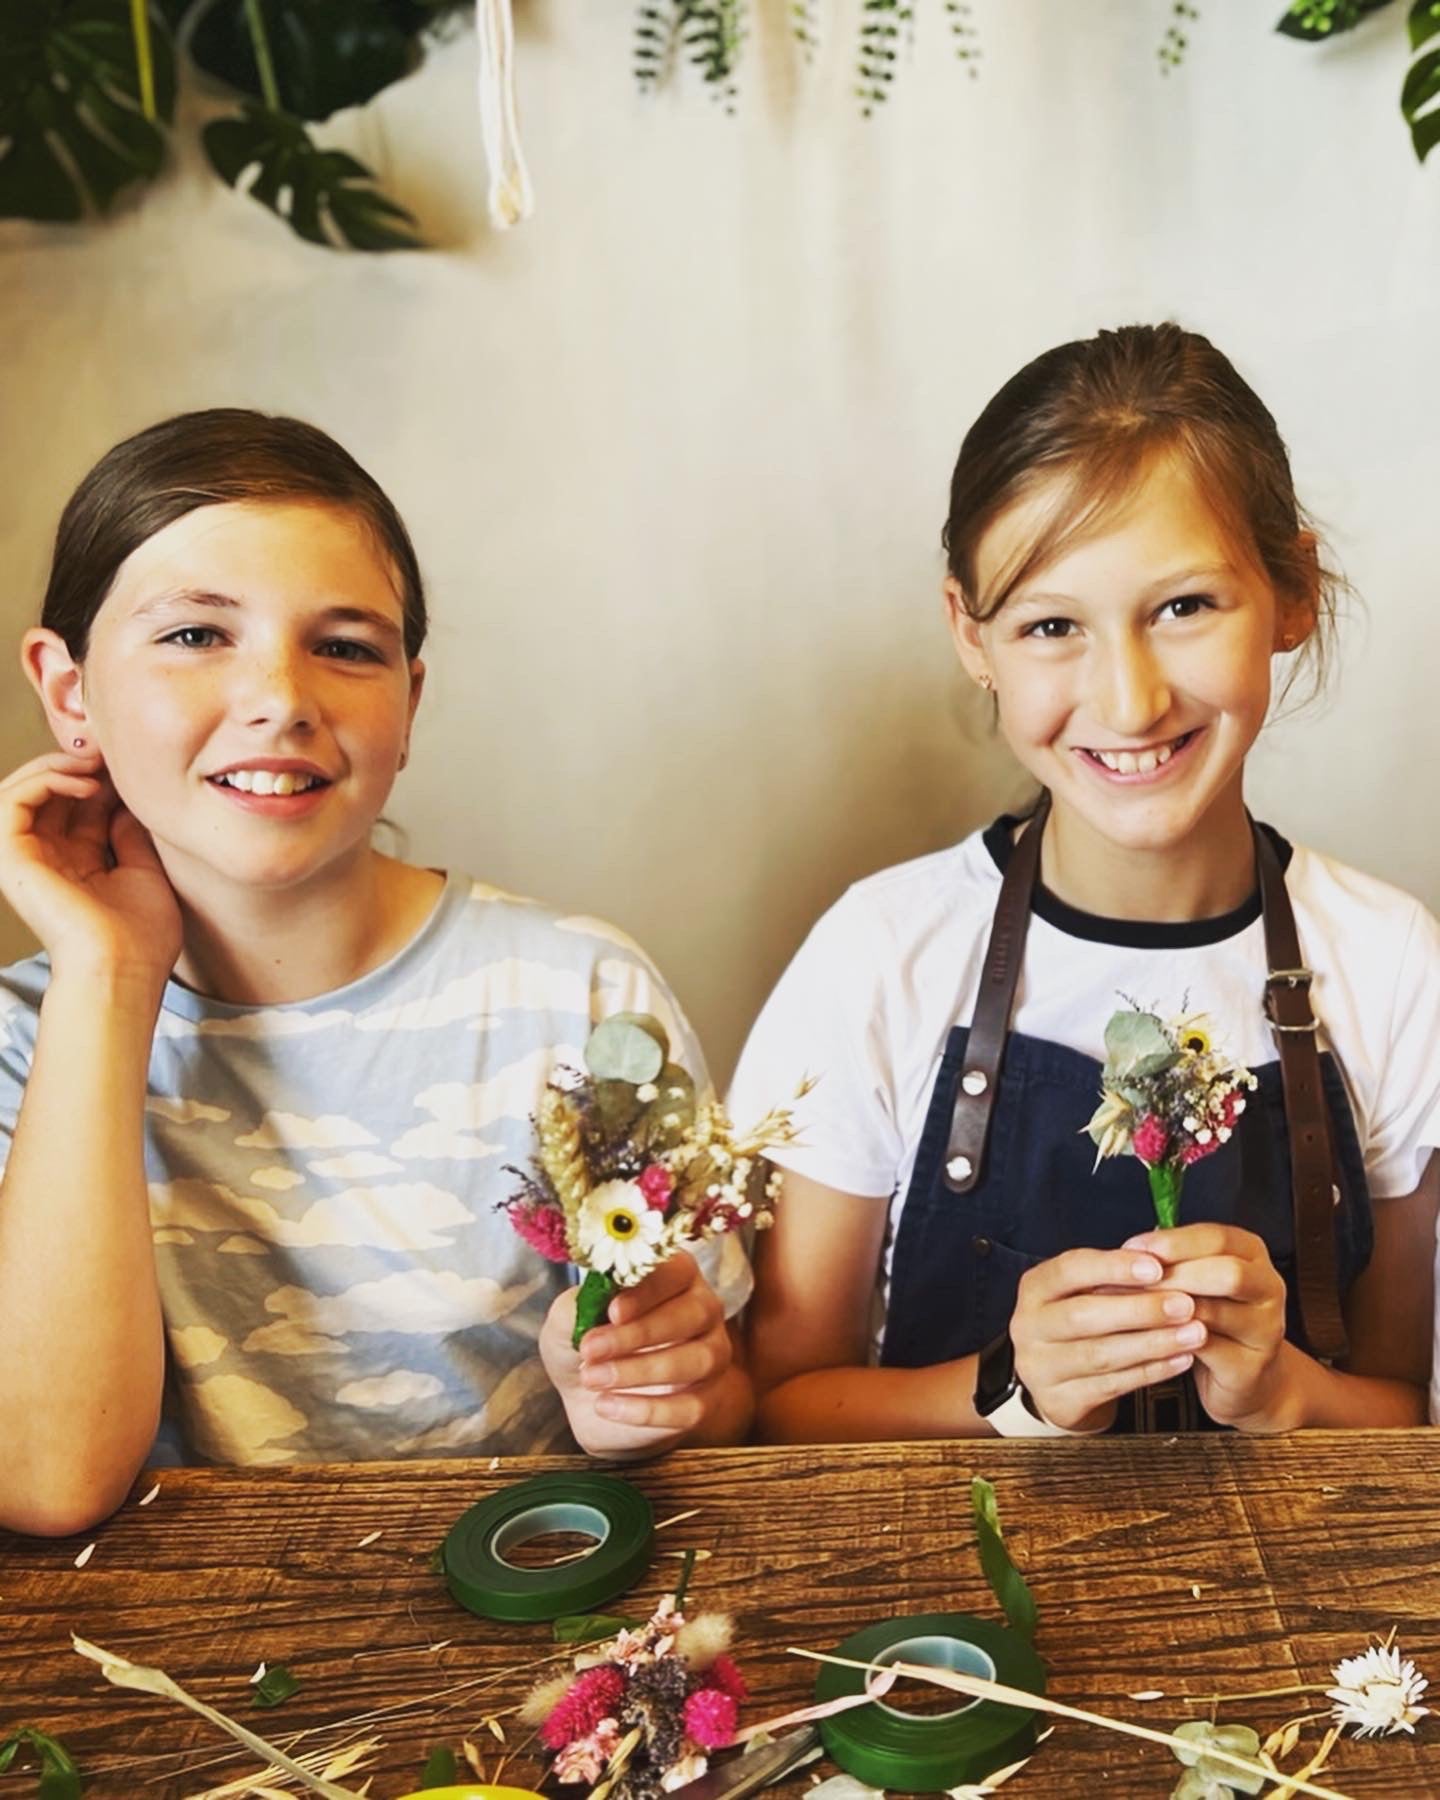 Family Buttonhole Workshop – Saturday 10th August 2024, Starting @ 11am (£50 for 2 people) 1.5 hours